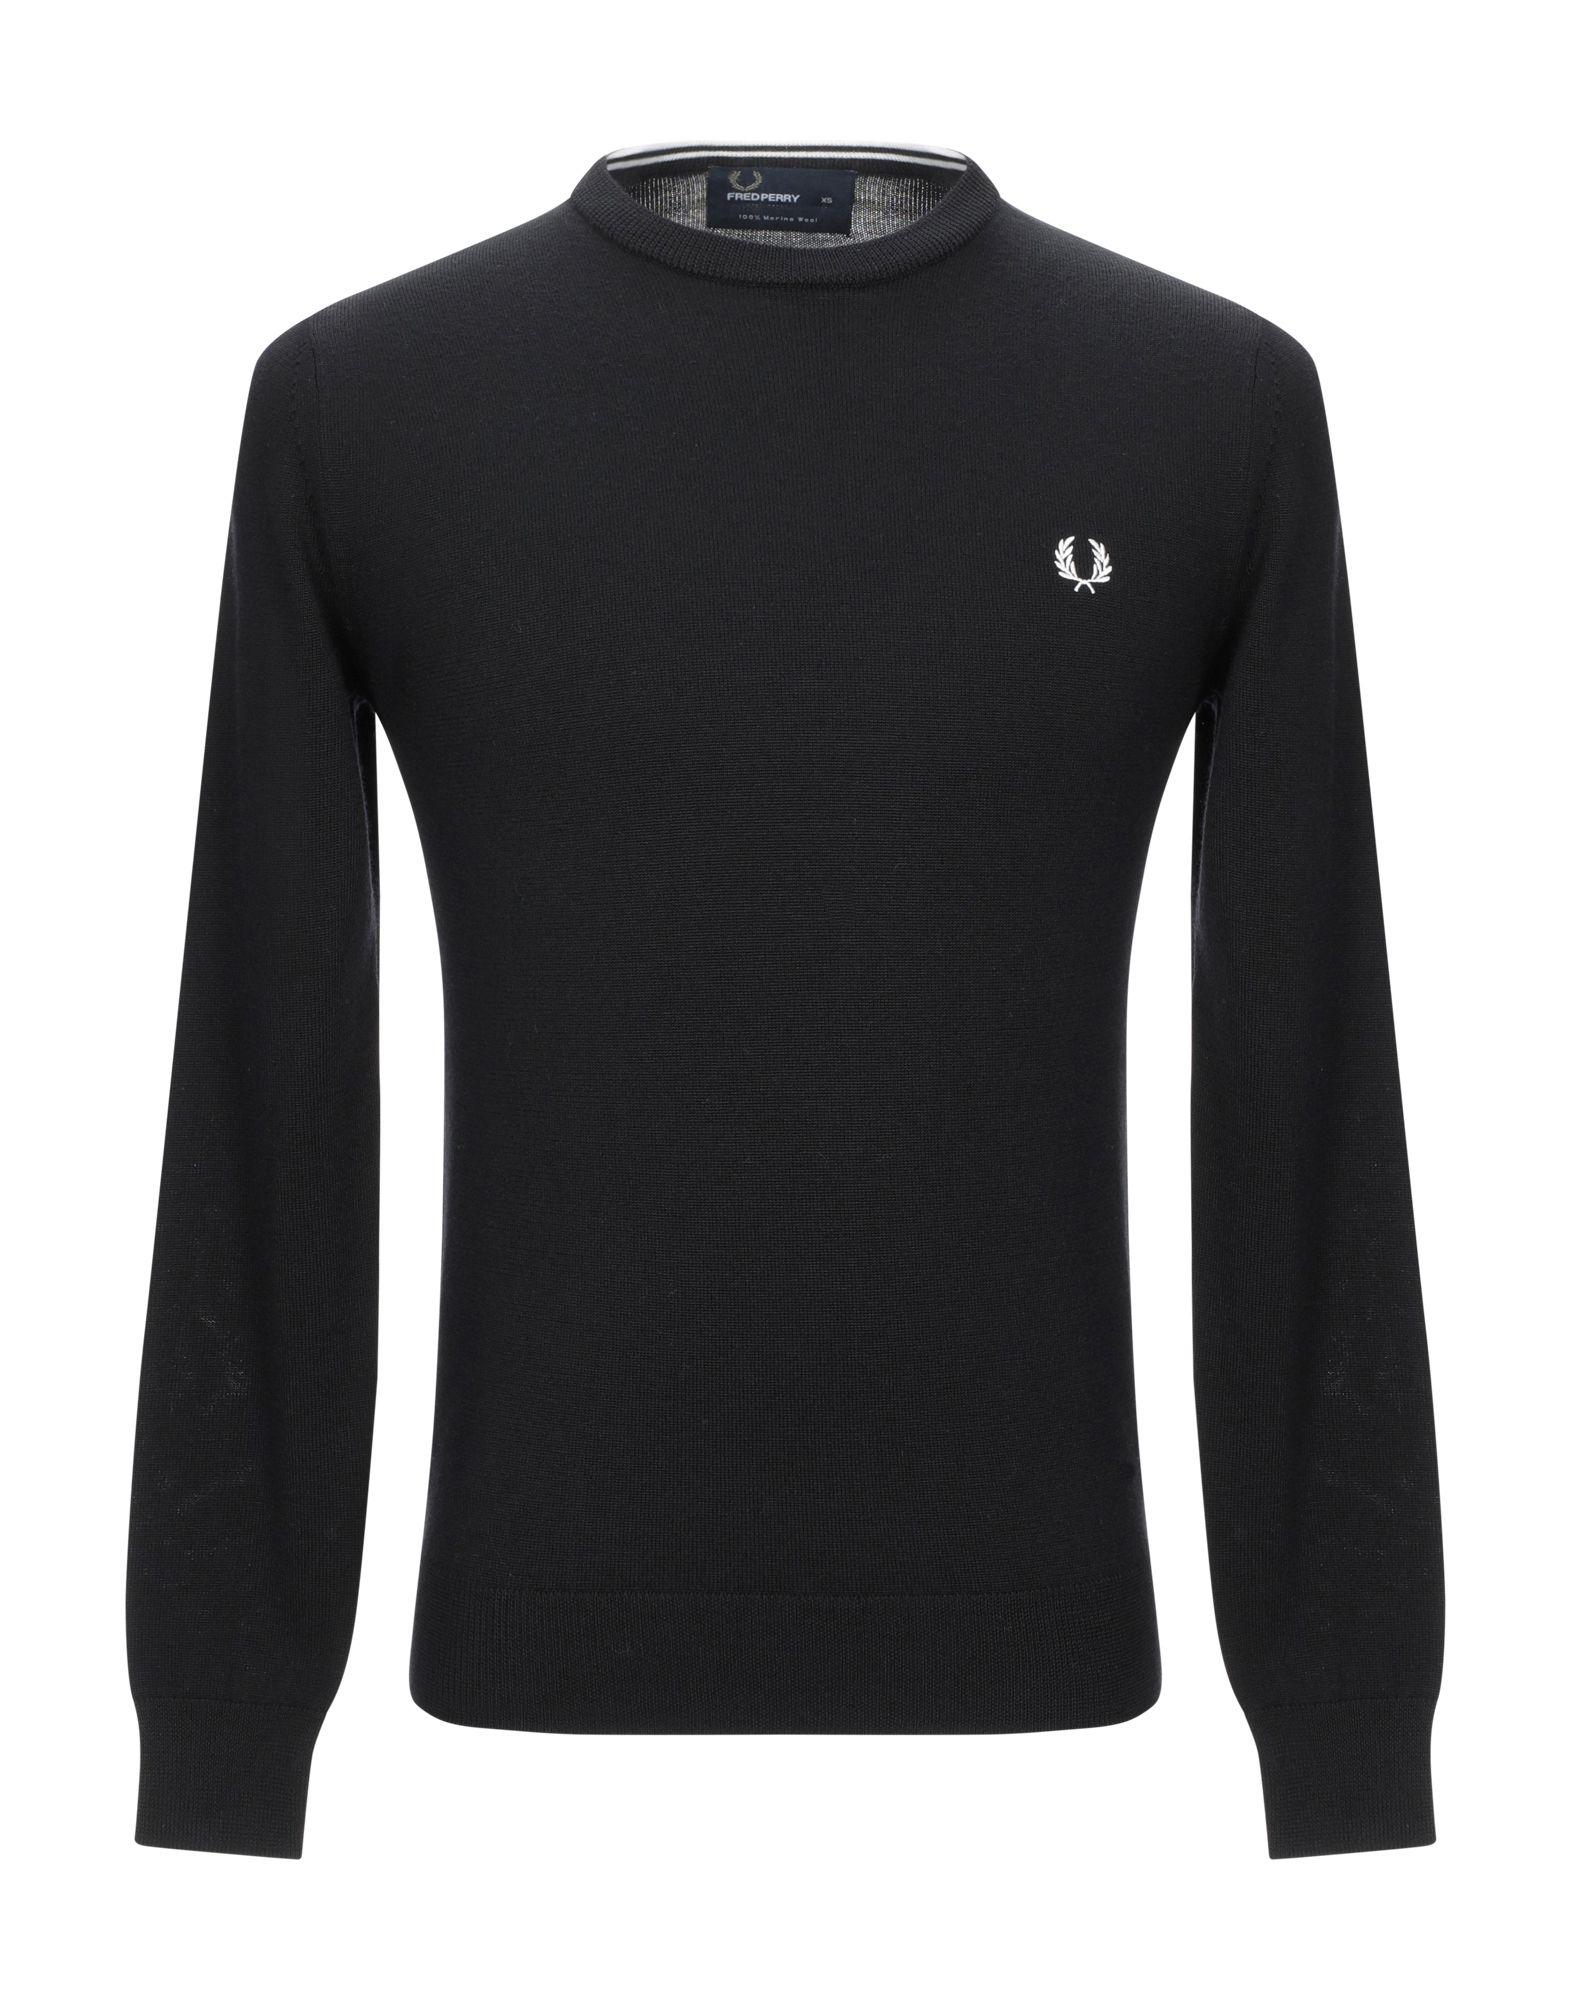 Fred Perry Sweater in Black for Men - Lyst